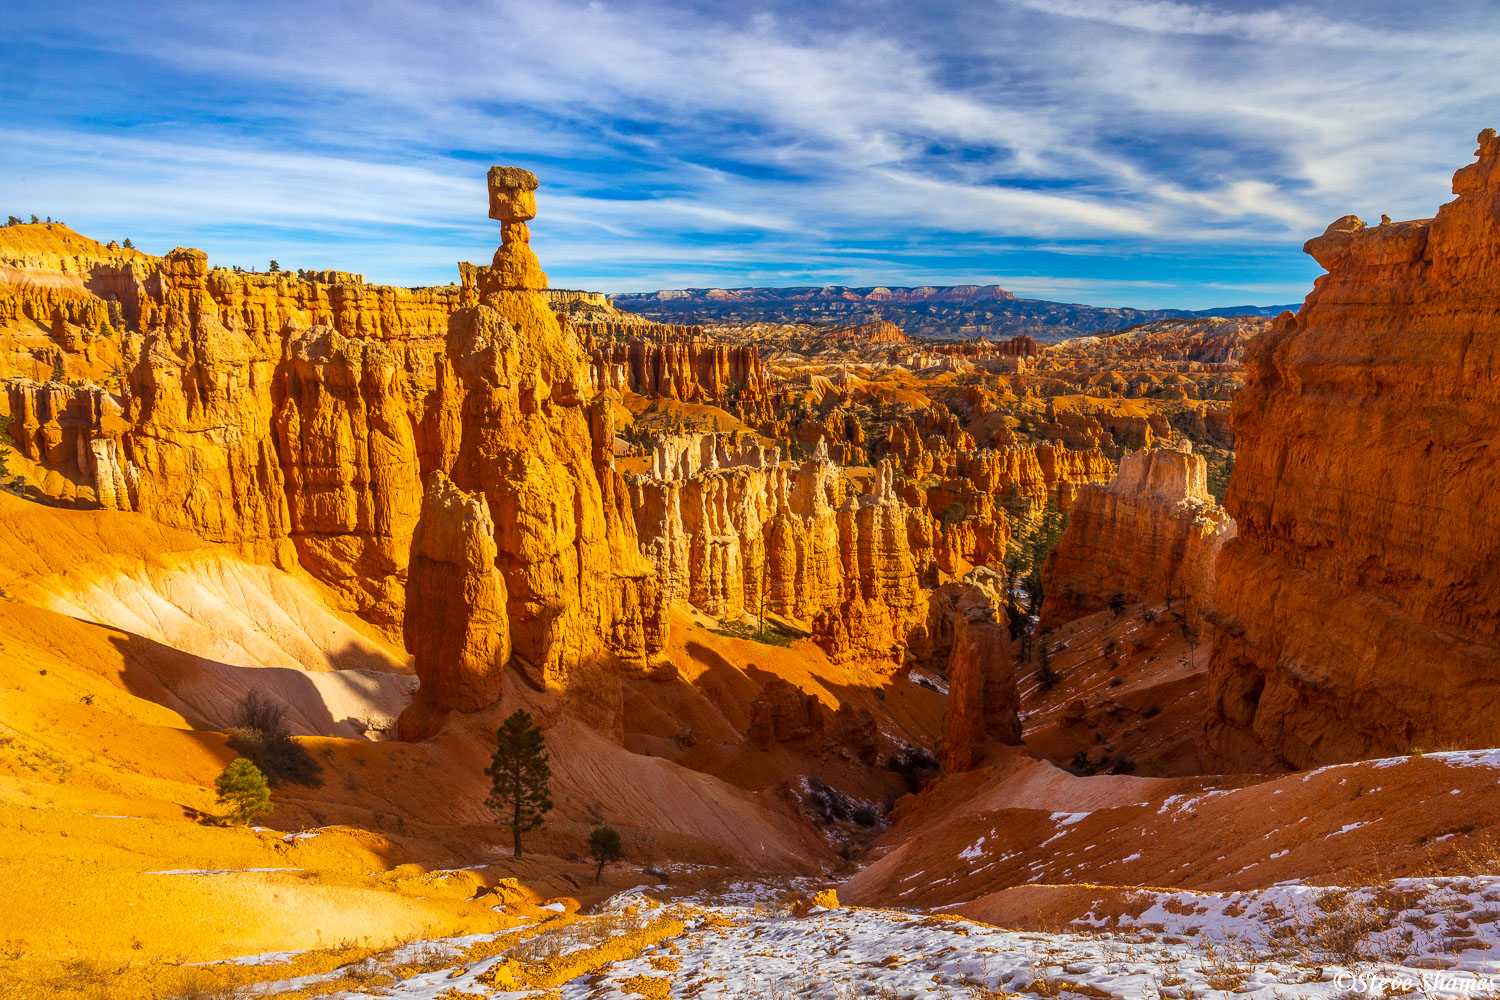 A great view of the hoodoos of Bryce Canyon National Park, with Thor's Hammer rising over the crowd.